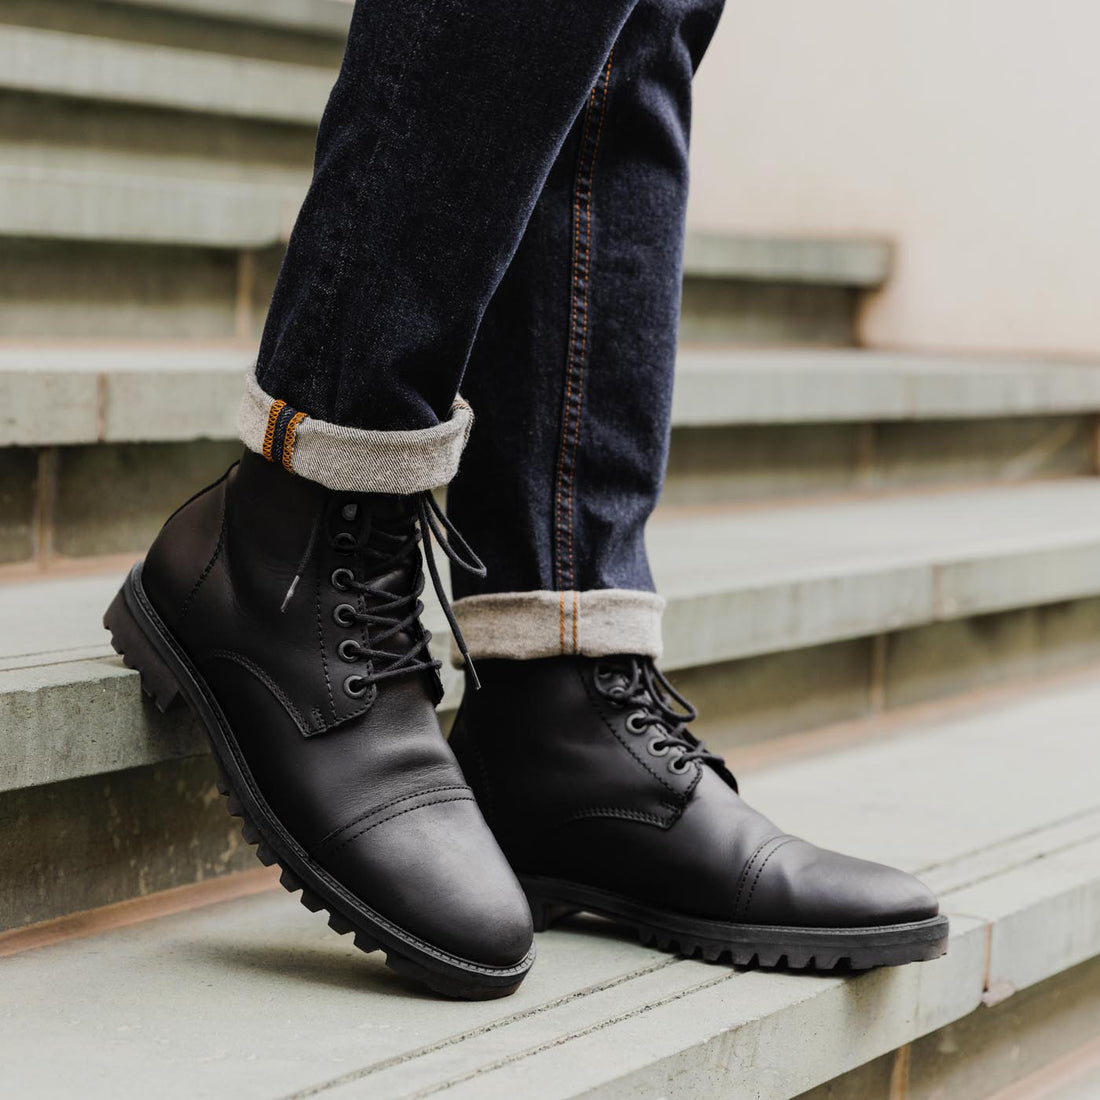 'Almost Perfect' Breaker Boot – Portland Leather